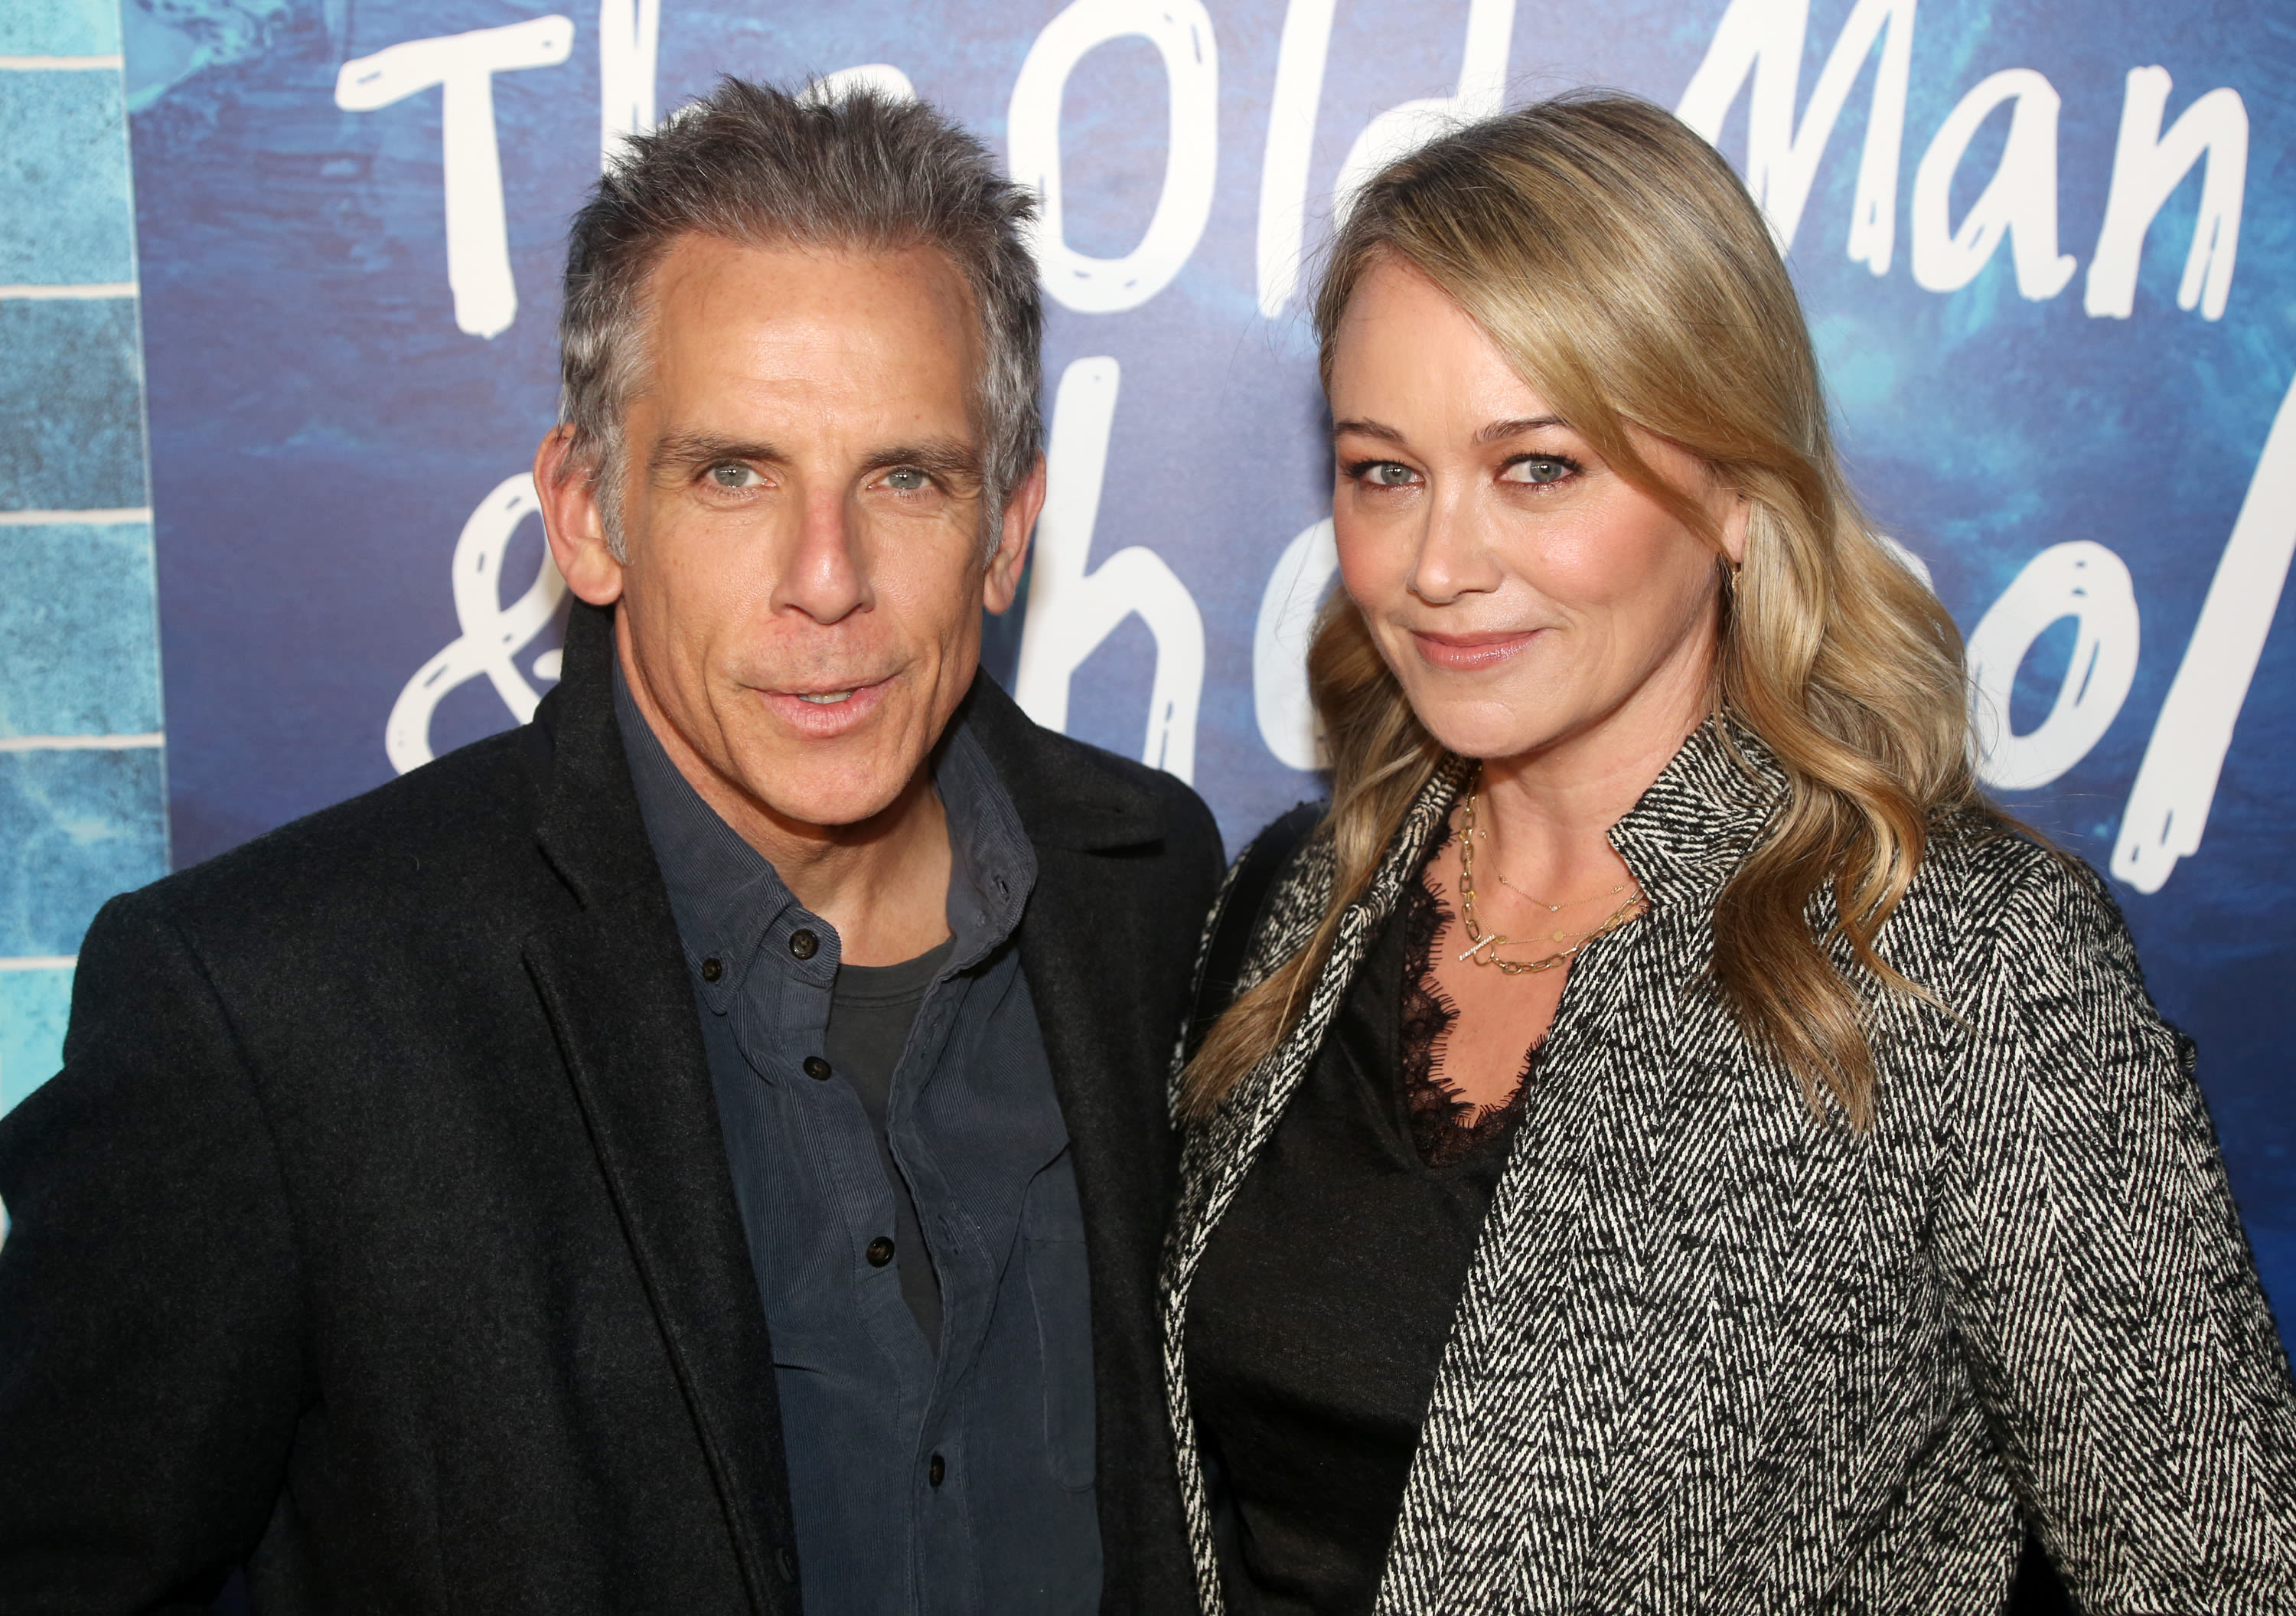 Ben Stiller Is ‘Devoted’ to Wife Christine Taylor: Actor Is Determined to ‘Make Marriage Work’